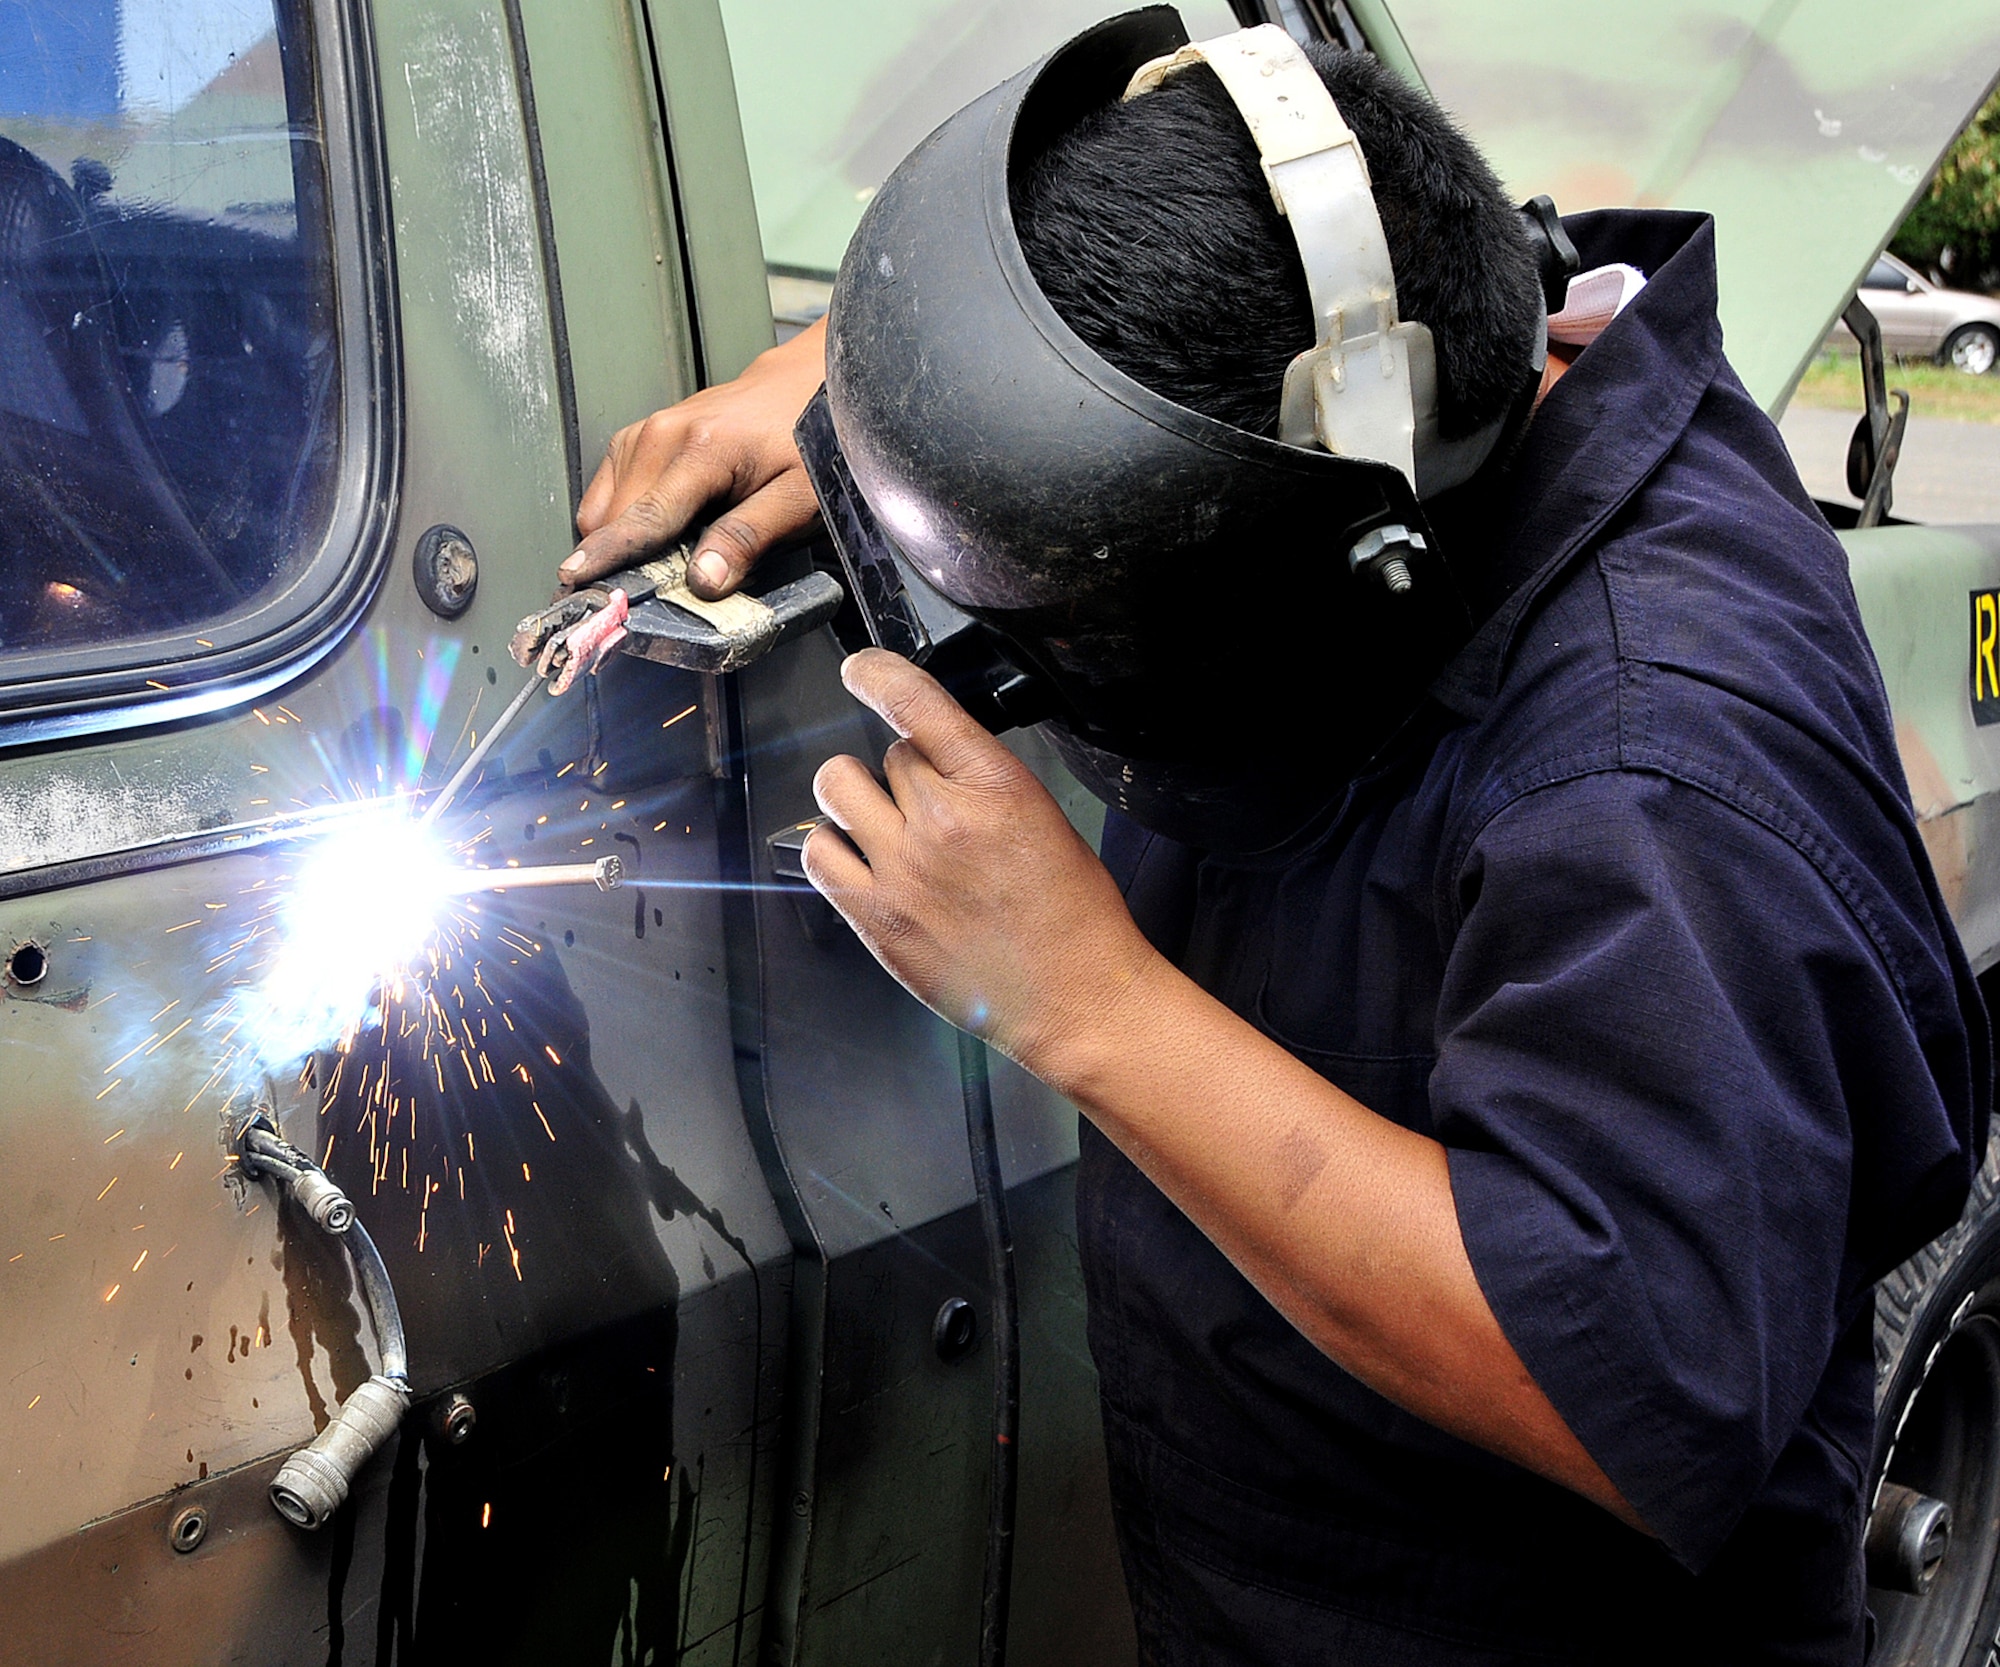 A Honduran Air Force metal worker fixes the holes needed to mount an antennae bracket on the tactical communication vehicle at Col. Hernán Acosta Mejia Air Base, Tegucigalpa, Honduras, Feb. 7.  Approximately 20 members of Air Mobility Command's 571st Mobility Support Advisory Squadron, 615th Contingency Response Wing, Travis AFB, Calif., are participating in a month-long Building Partner Capacity mission in Tegucigalpa, Honduras.  (U.S. Air Force photo by Tech. Sgt. Lesley Waters)